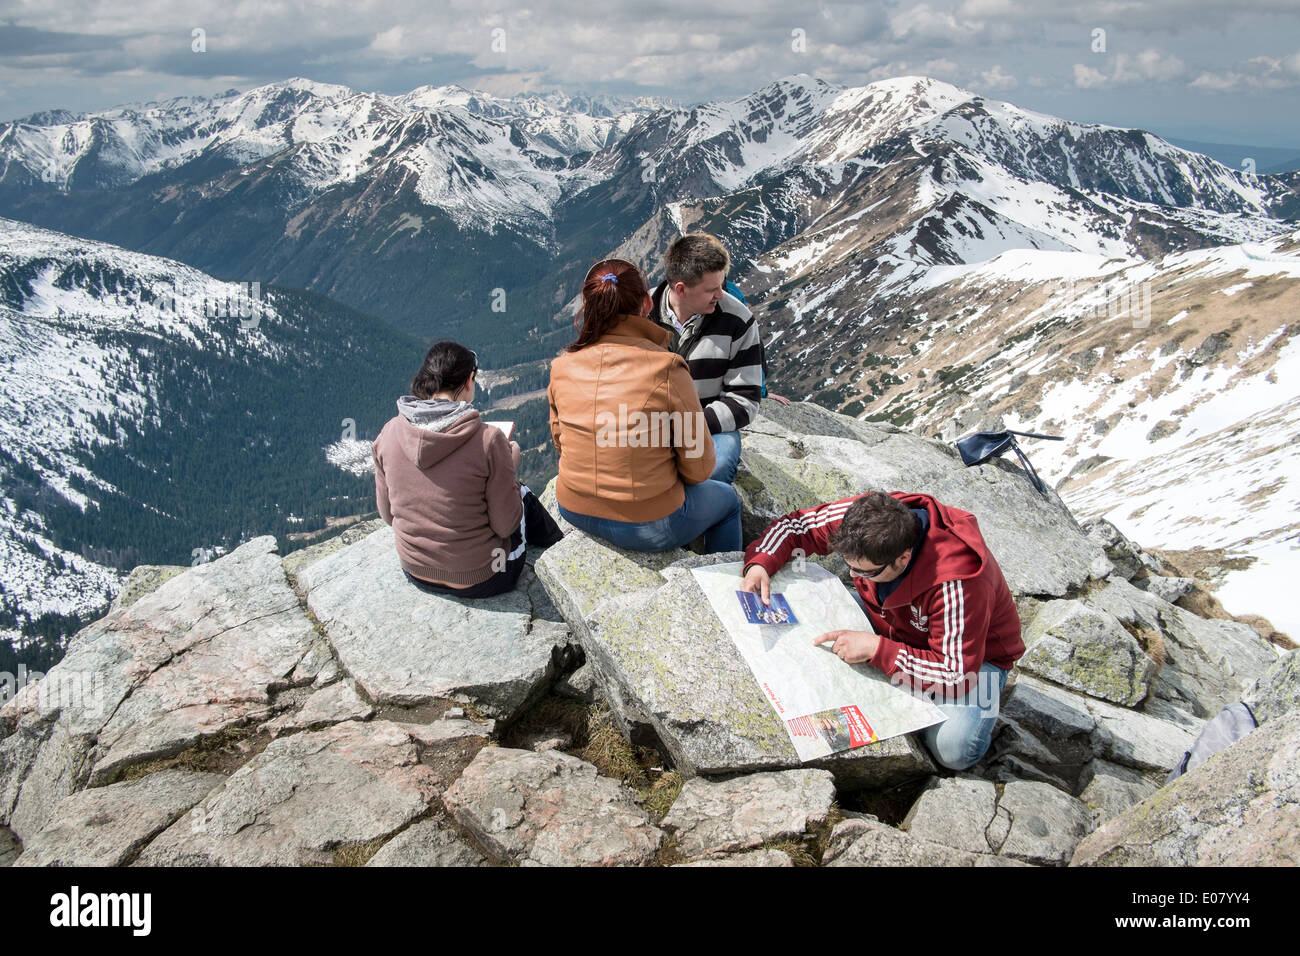 View over Tatra Mountains from Kasprowy Wierch, Poland Stock Photo